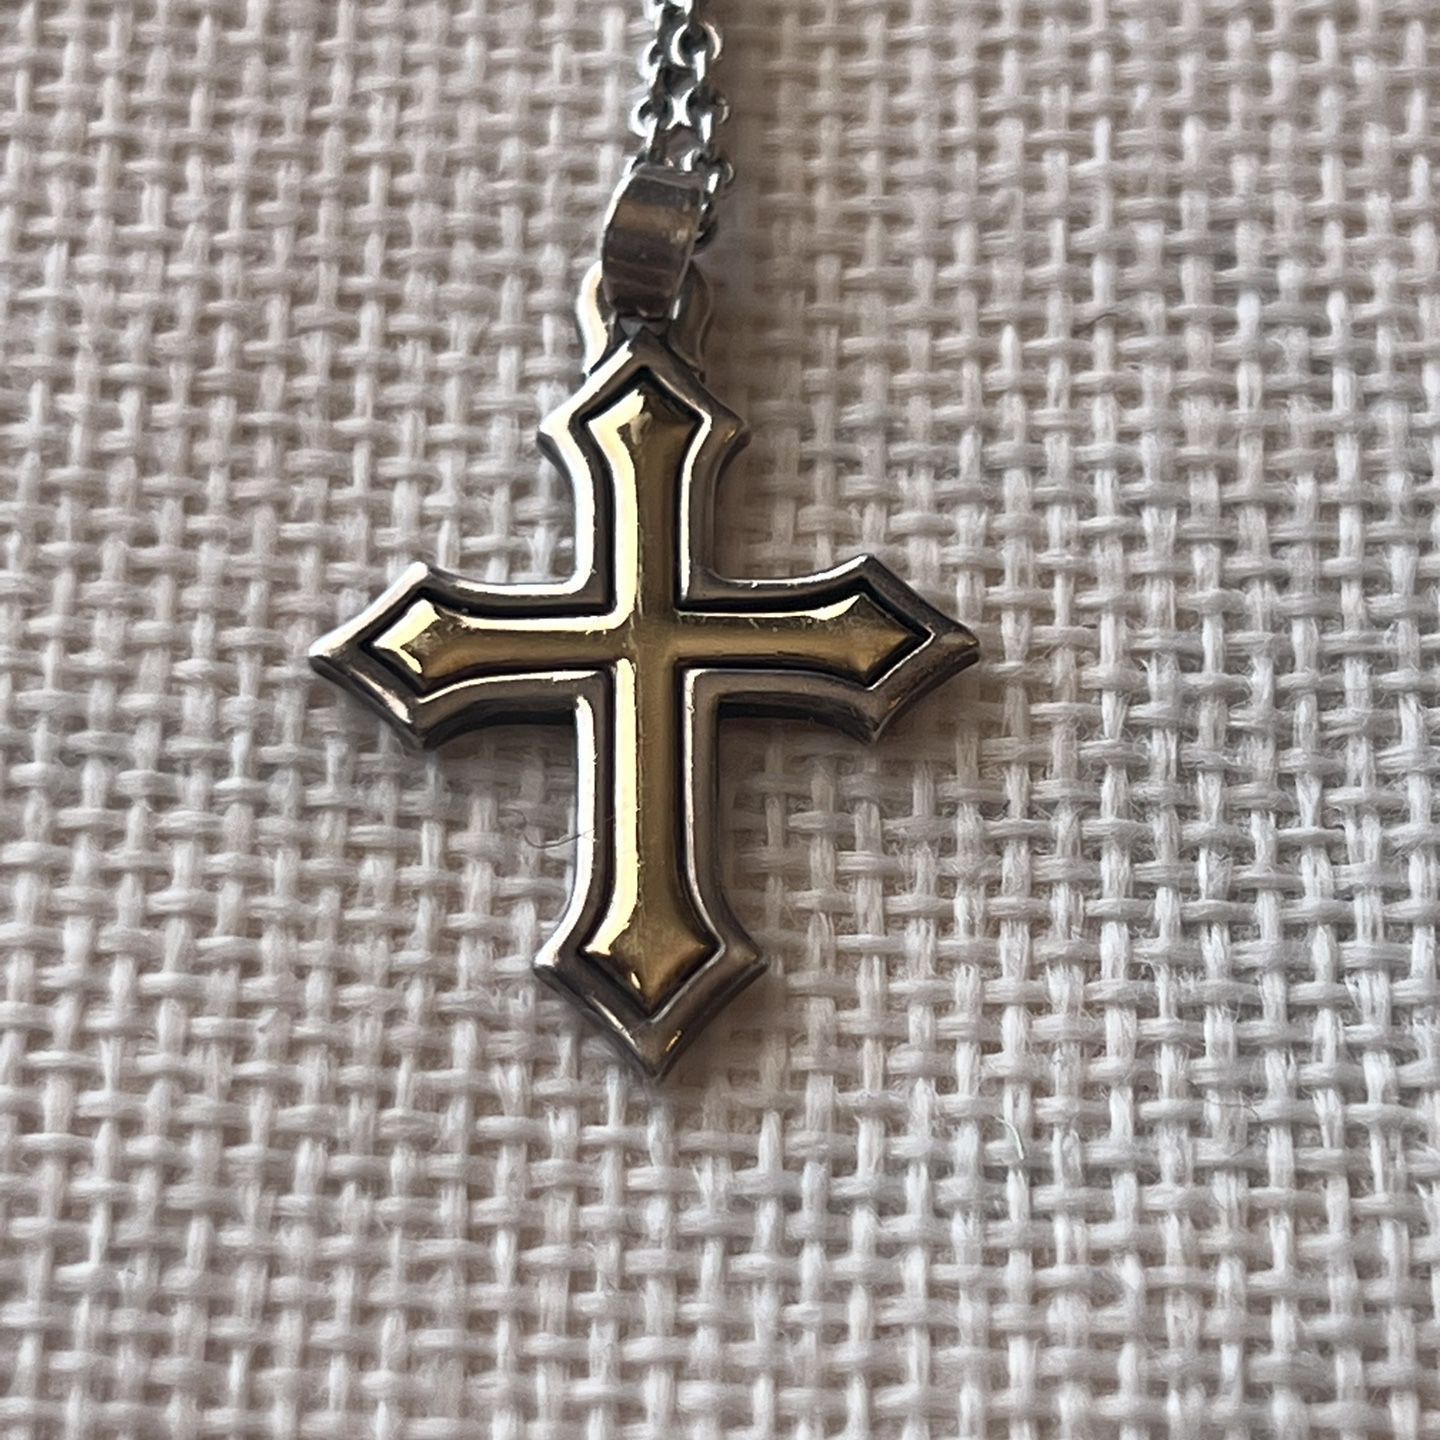 JAMES AVERY RETIRED PASSION CROSS STAMPED SILVER AND 18kt Gold With 16” Silver James Avery Chain 